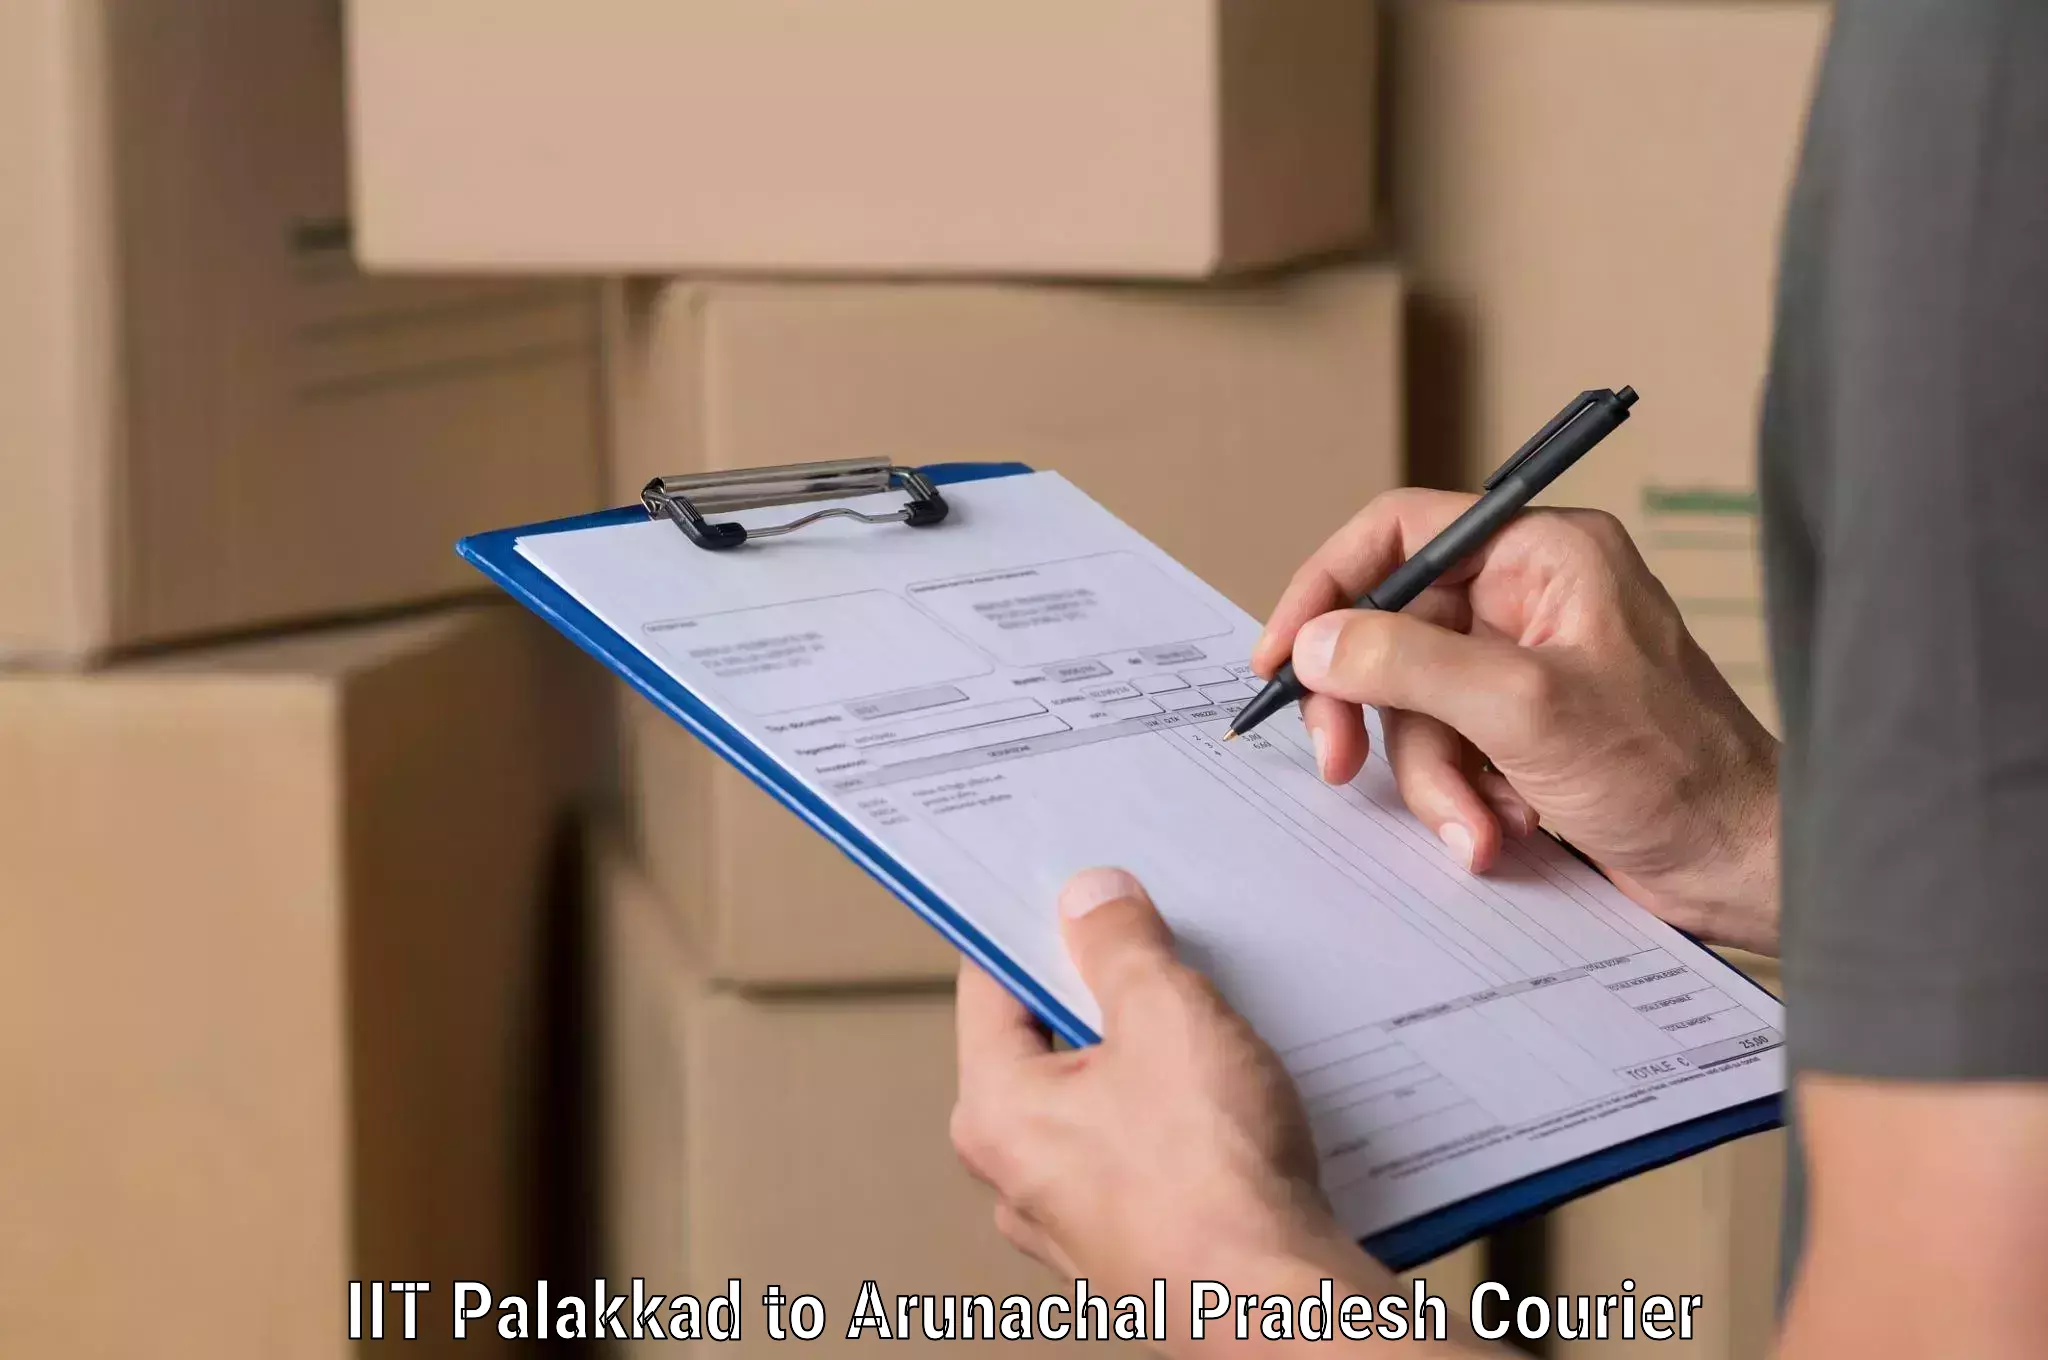 Parcel handling and care IIT Palakkad to Boleng